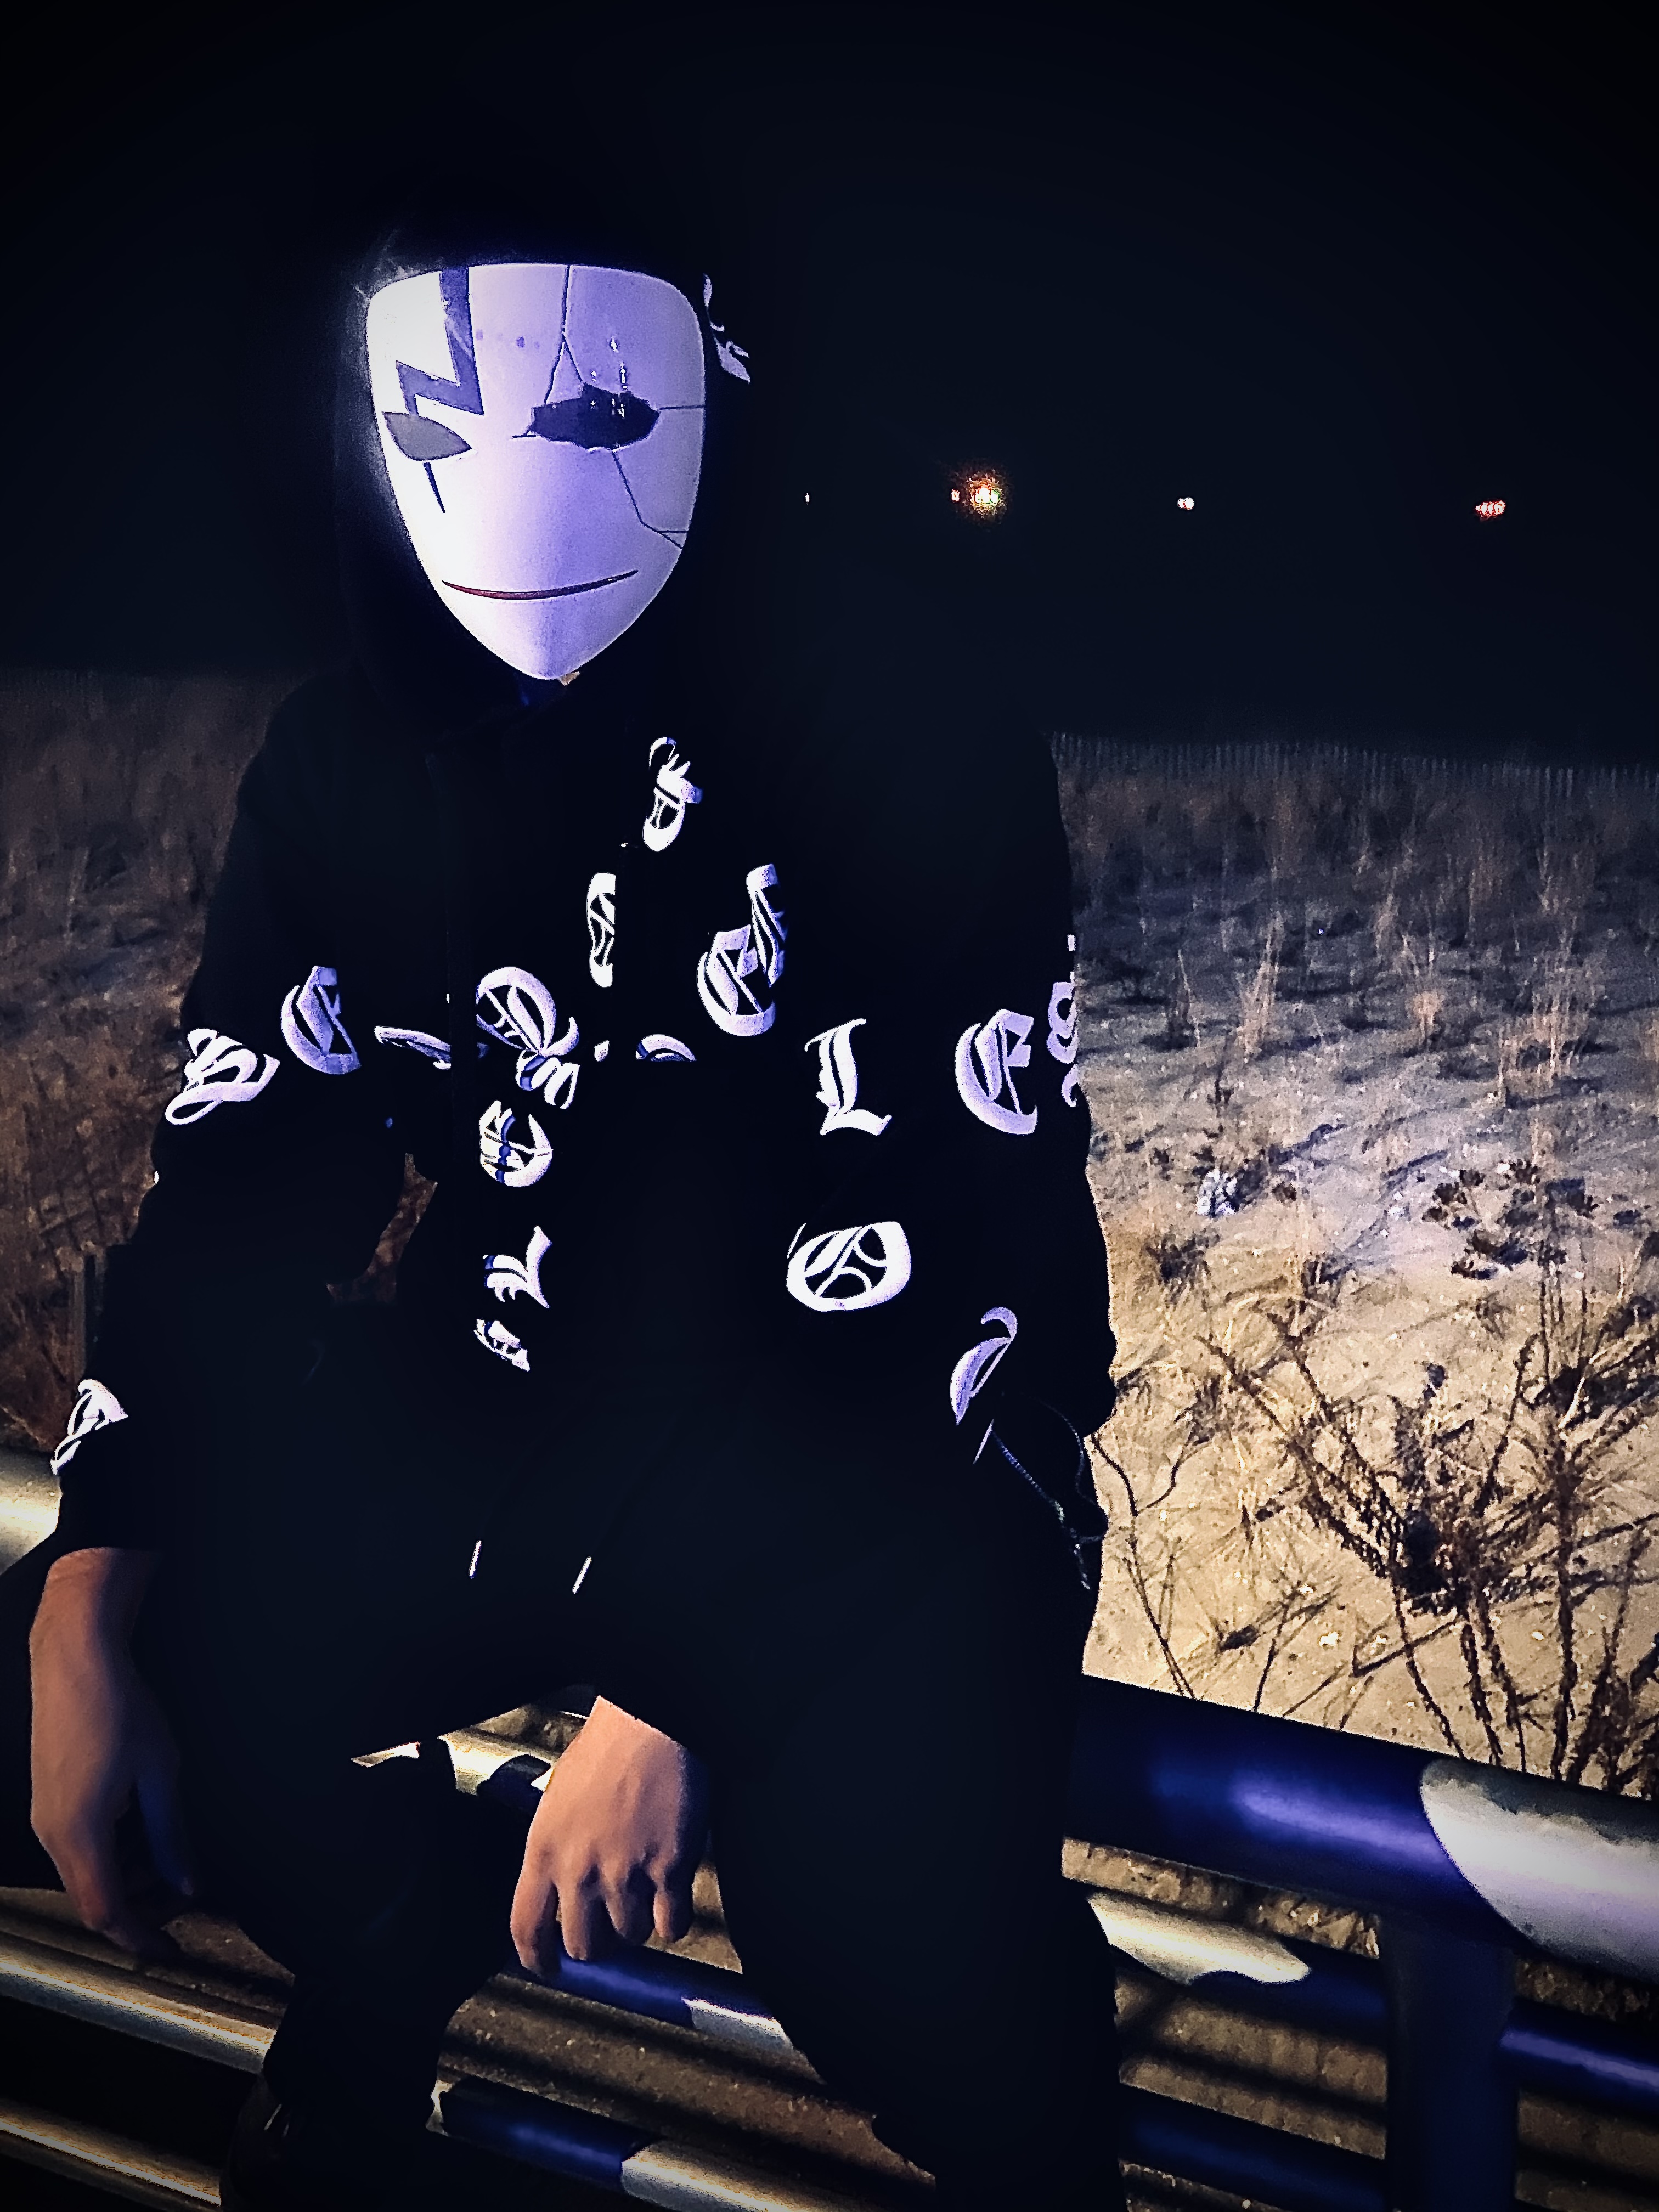 Loki The Trickster - YKTV (Official Music Video)Picture